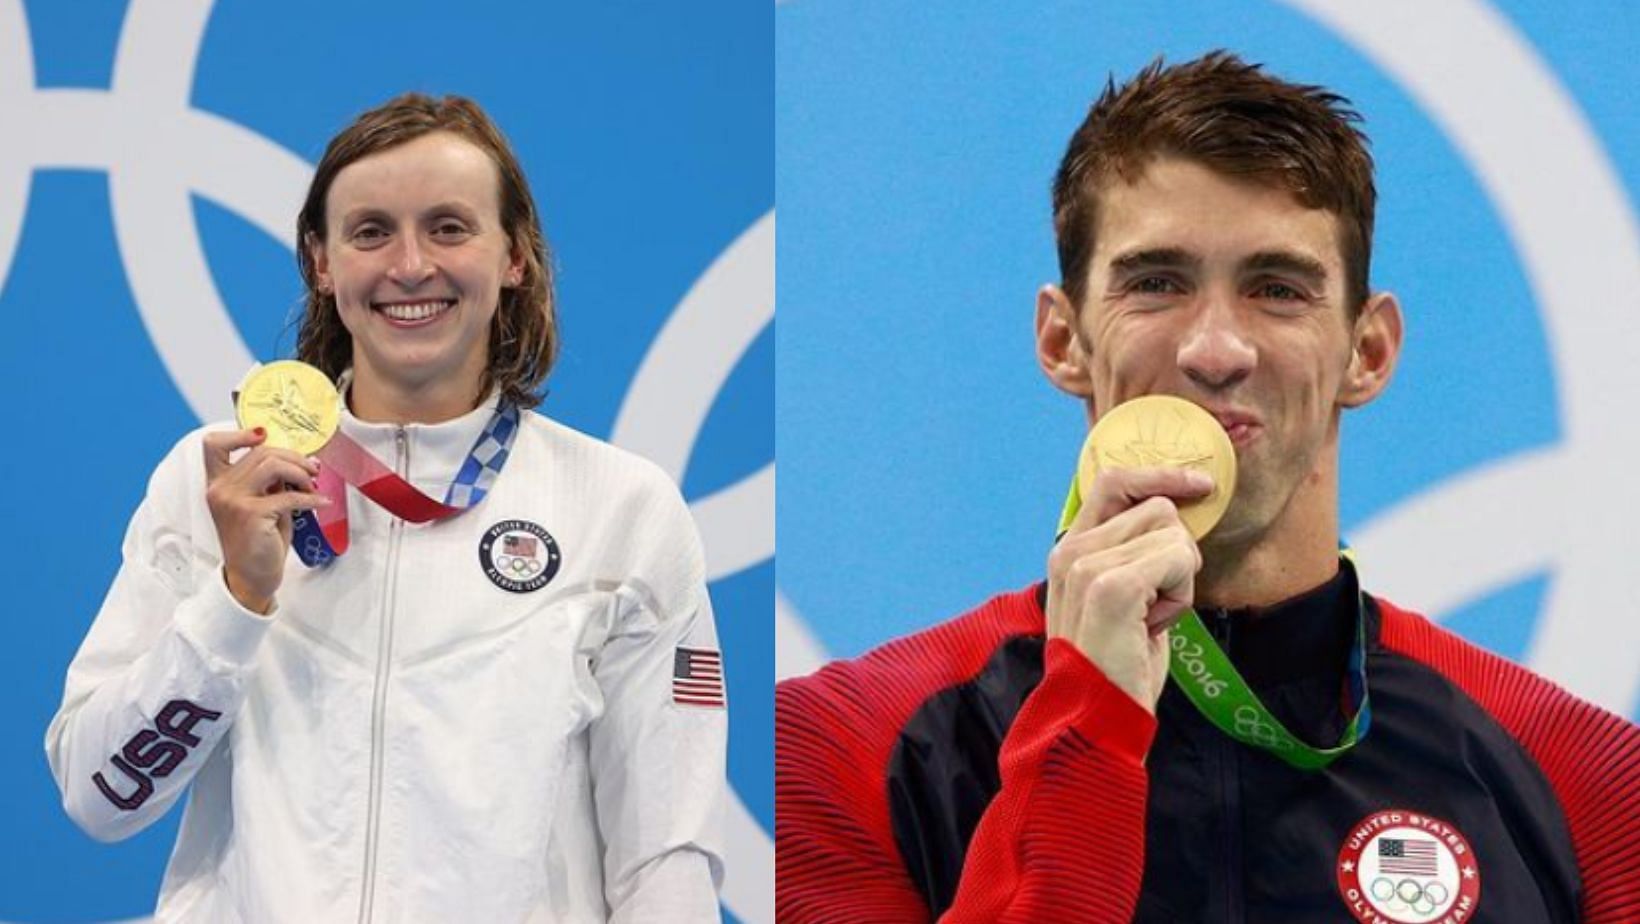 Who was more Olympic medals between Katie Ledecky and Michael Phelps 